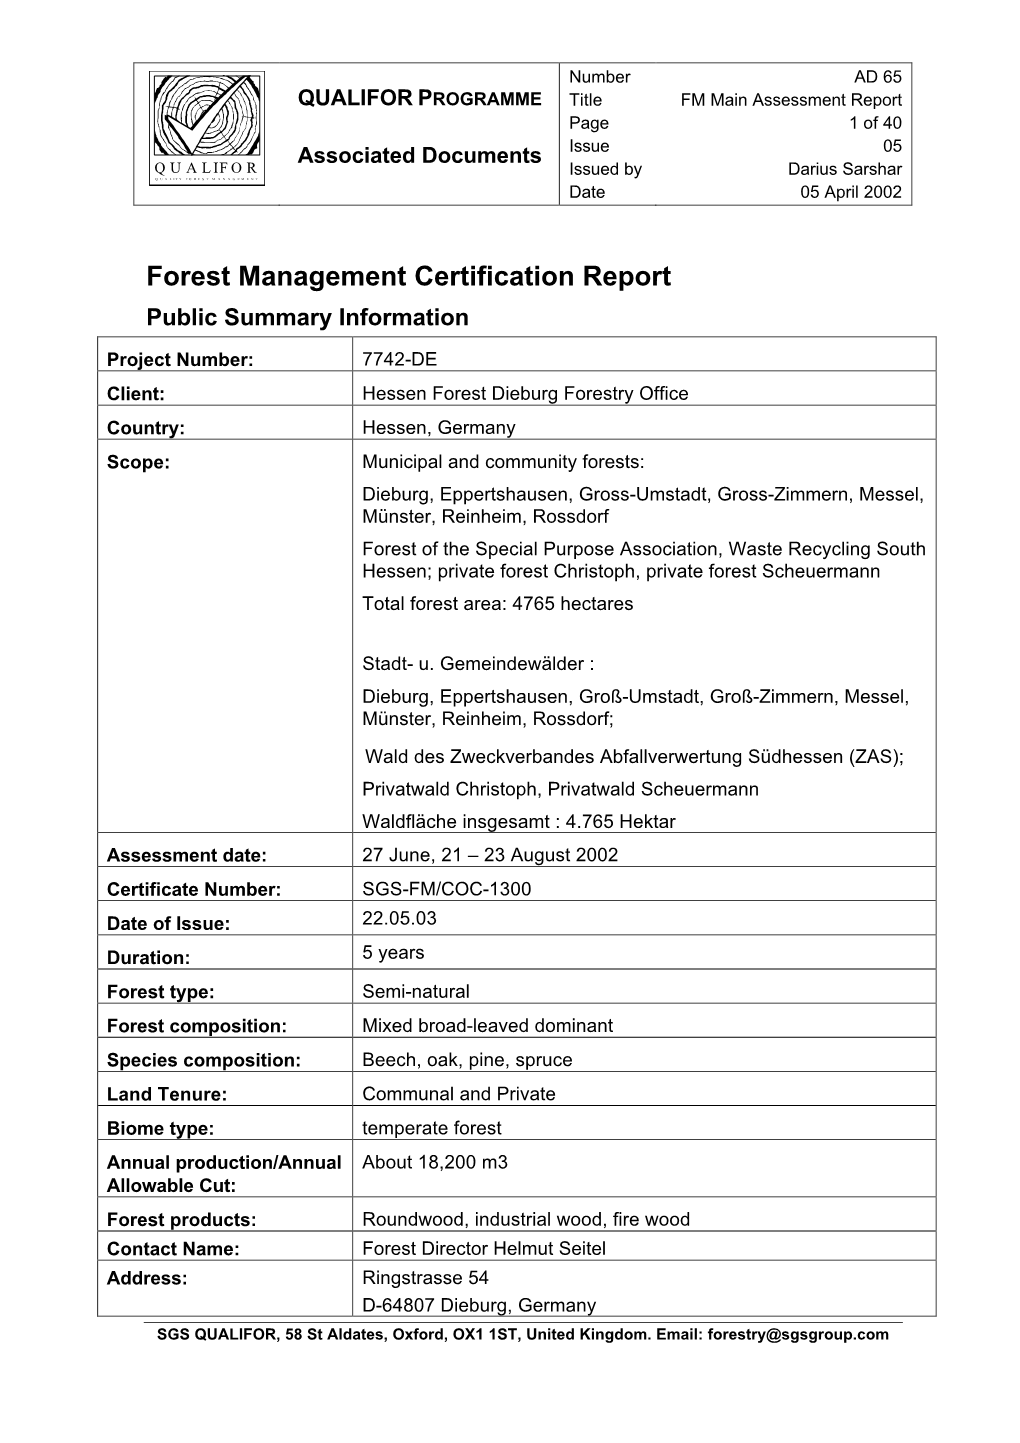 Forest Management Certification Report Public Summary Information